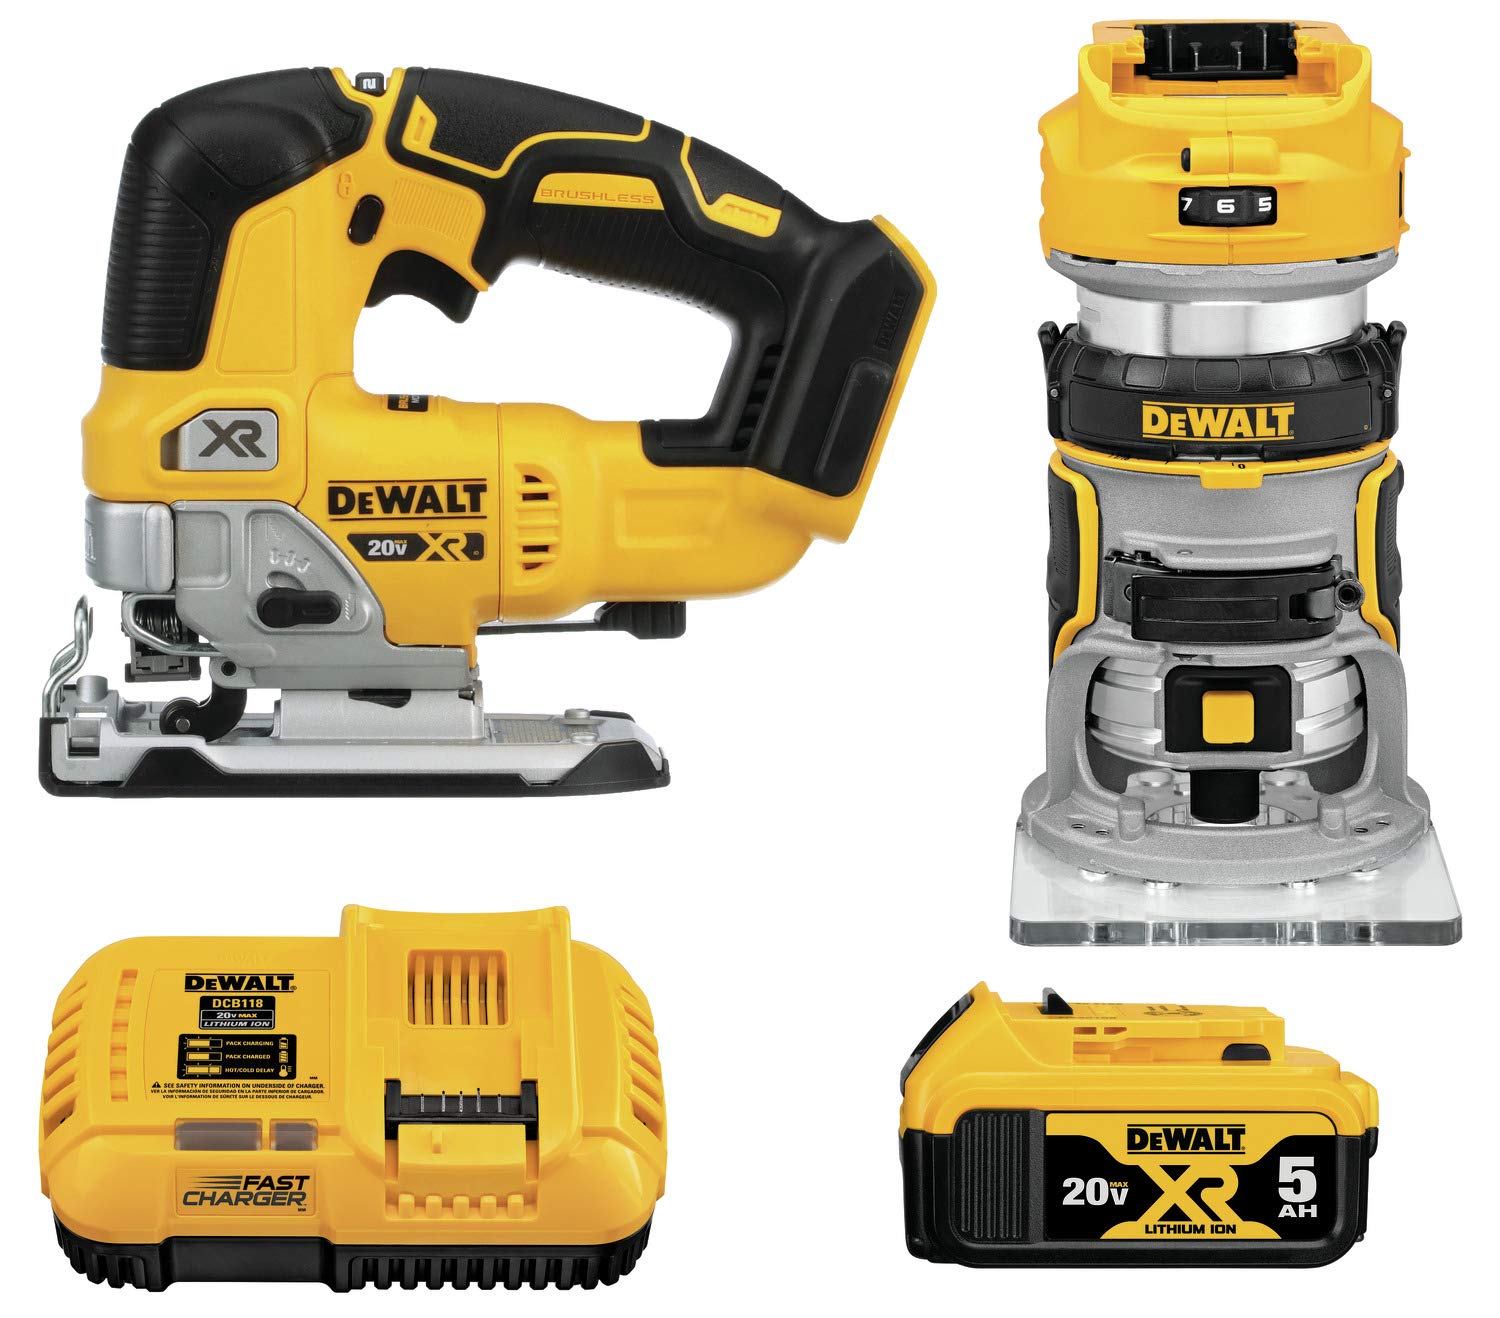 What are the Key Features to Consider When Choosing a Cordless Tool for Professional Woodworking?